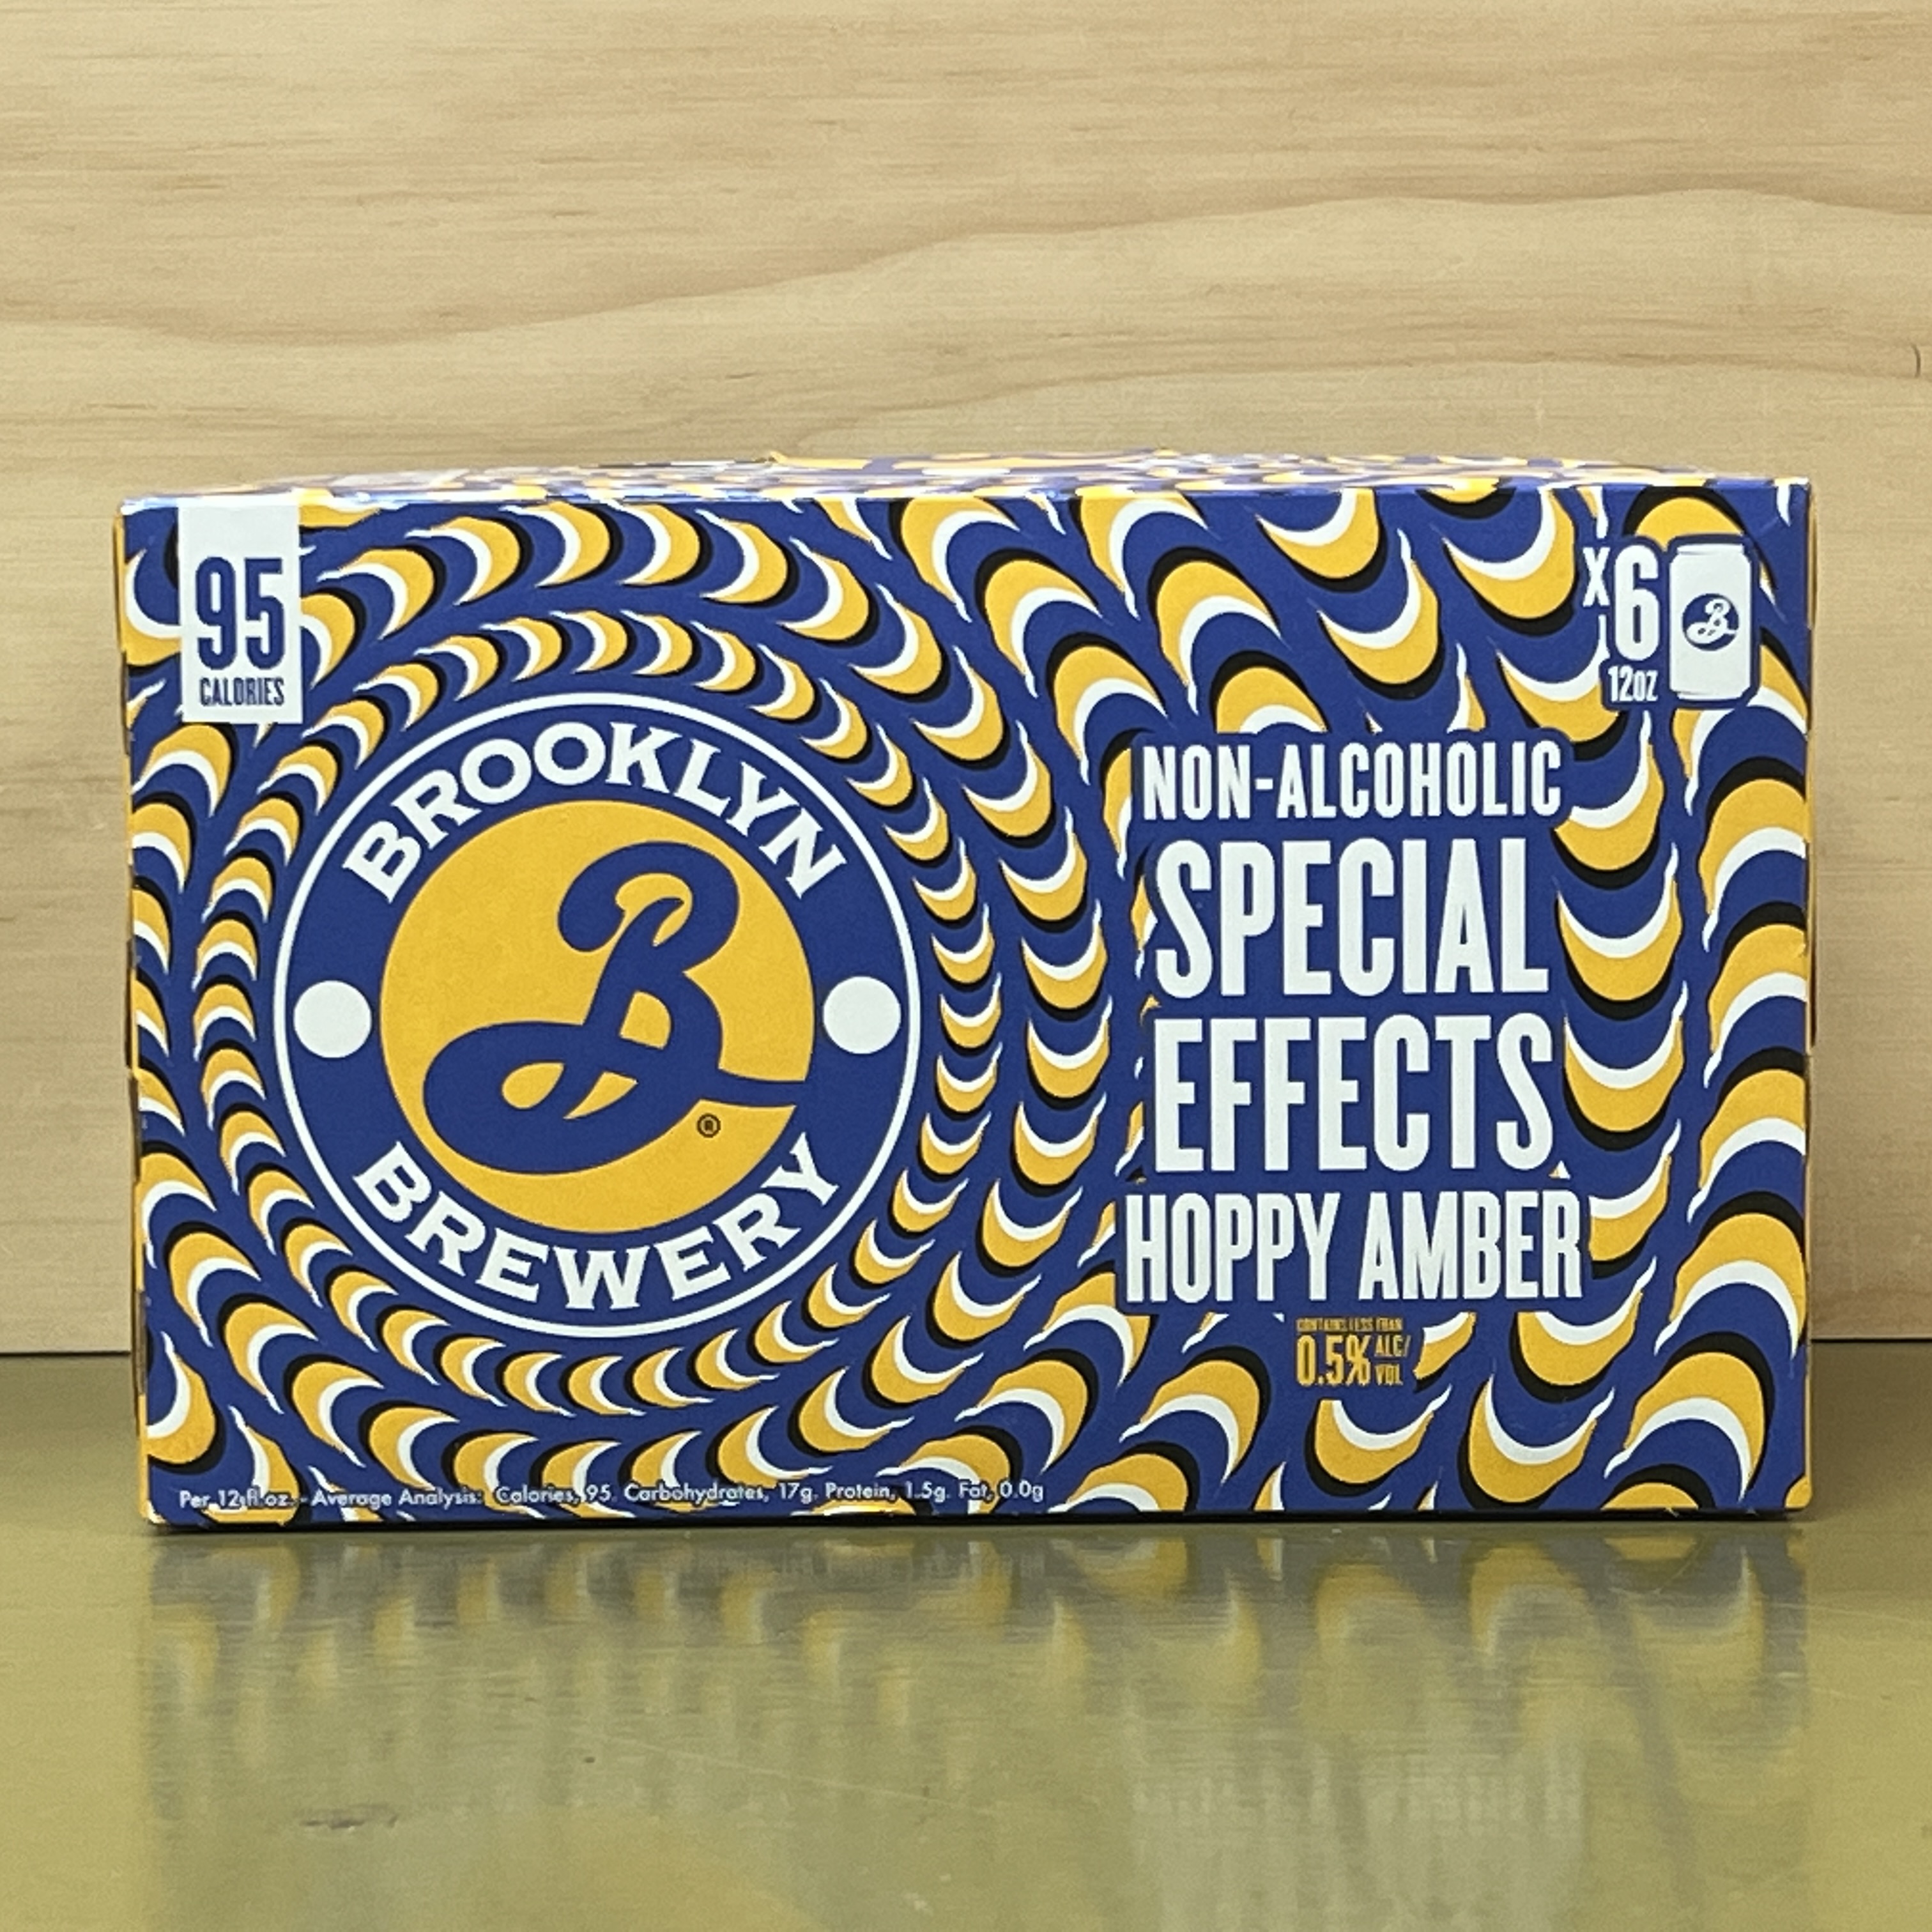 Brooklyn Brewery Special Effects Hoppy Amber 6 x 12oz cans - Click Image to Close